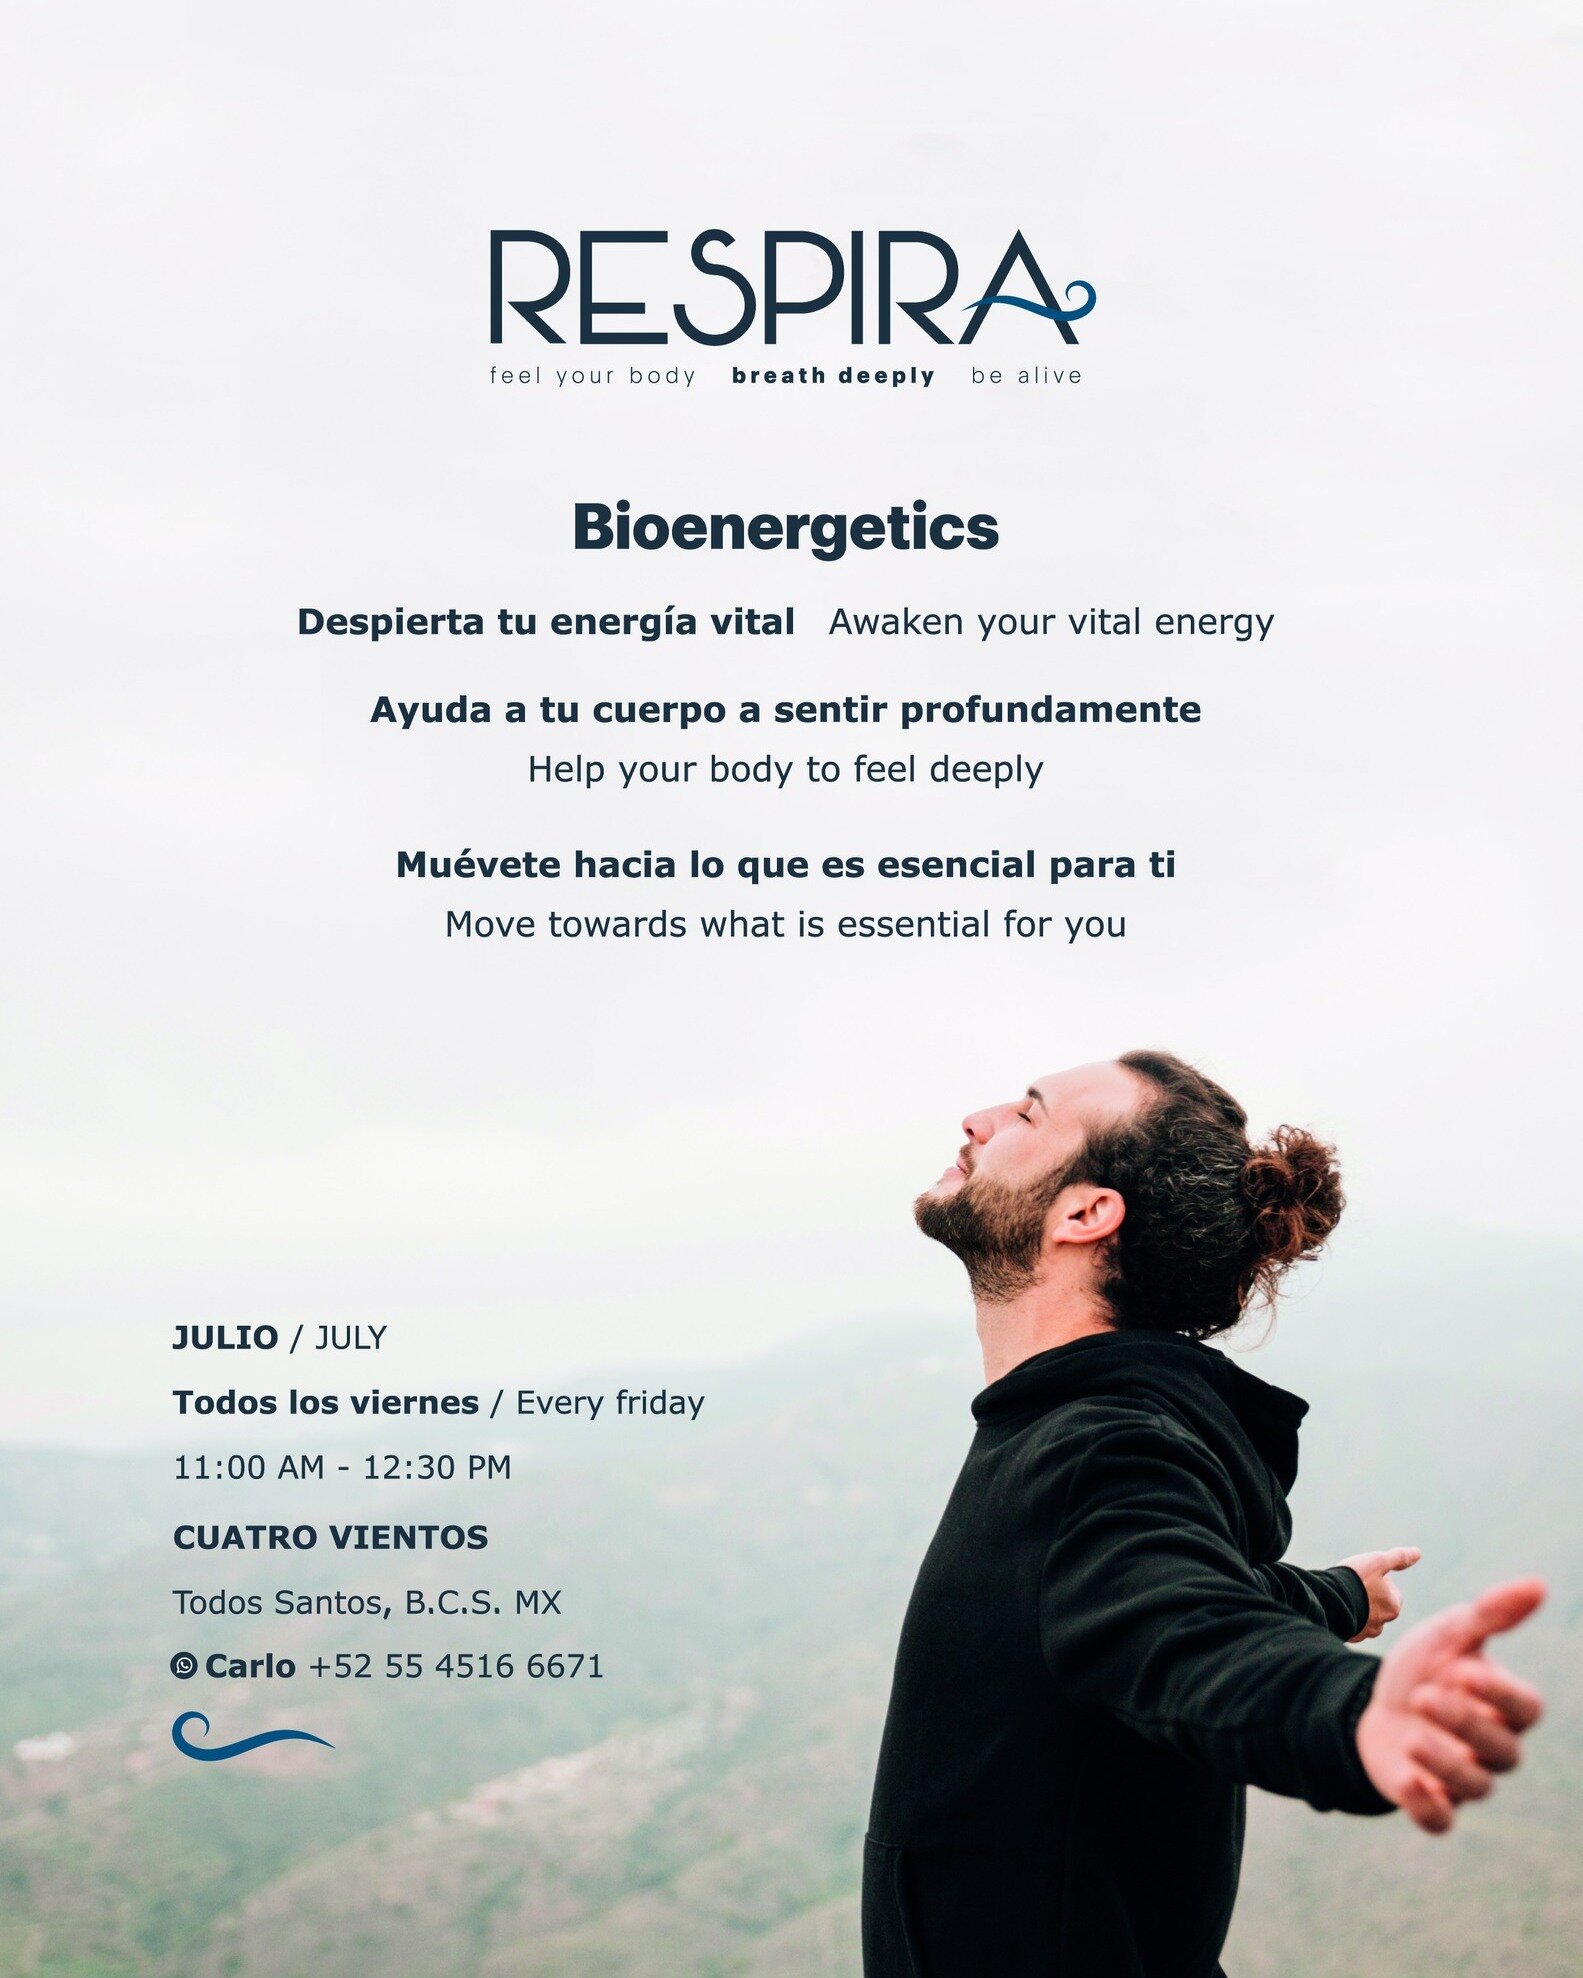 (Espanol debajo)
.
Discover the power of Bioenergetics - a path to awakening your vital energy. Dive deep into the realm of profound sensations, helping your body connect with its innermost depths. Experience a transformative journey as you move towa